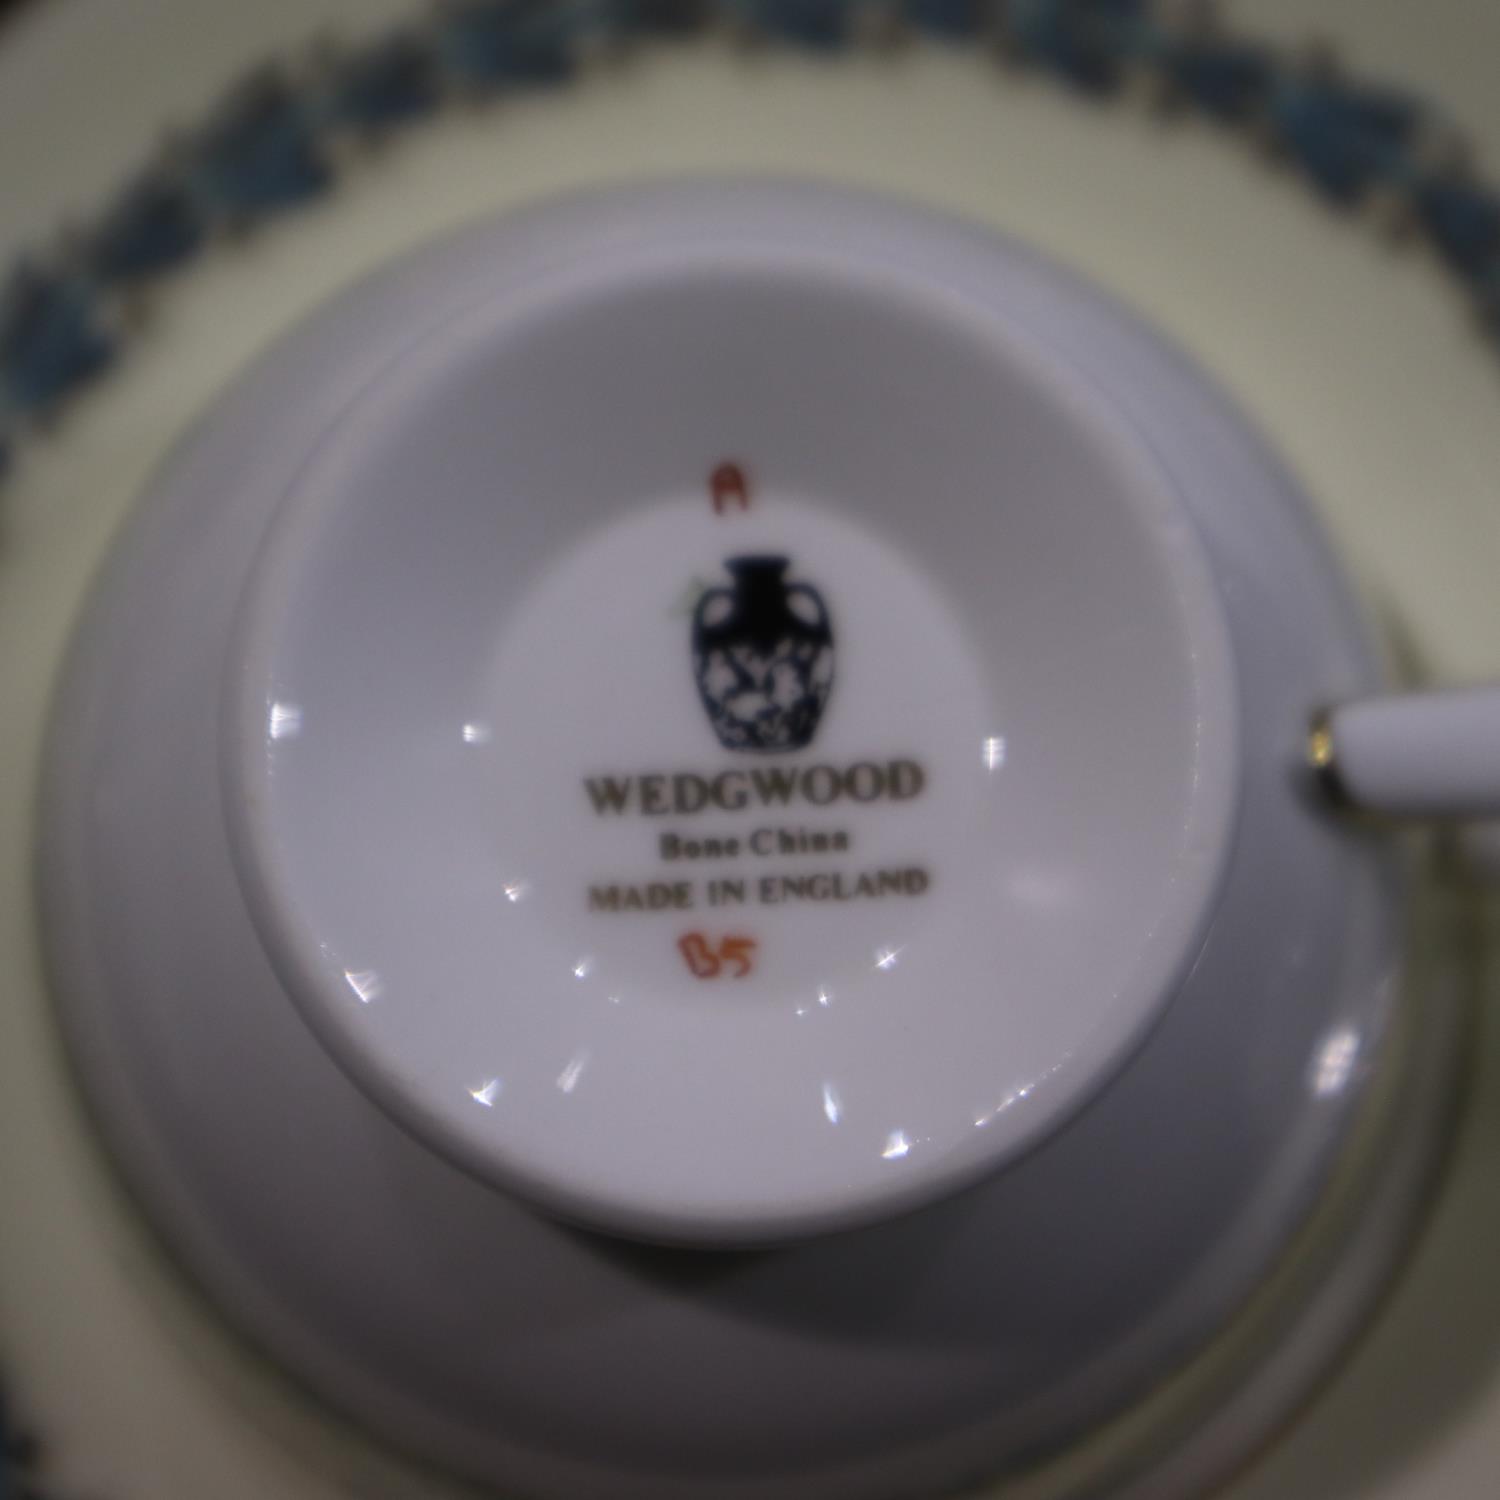 Wedgwood 39 piece tea service in the Appledore patten, no chips or cracks. Not available for in- - Image 2 of 2